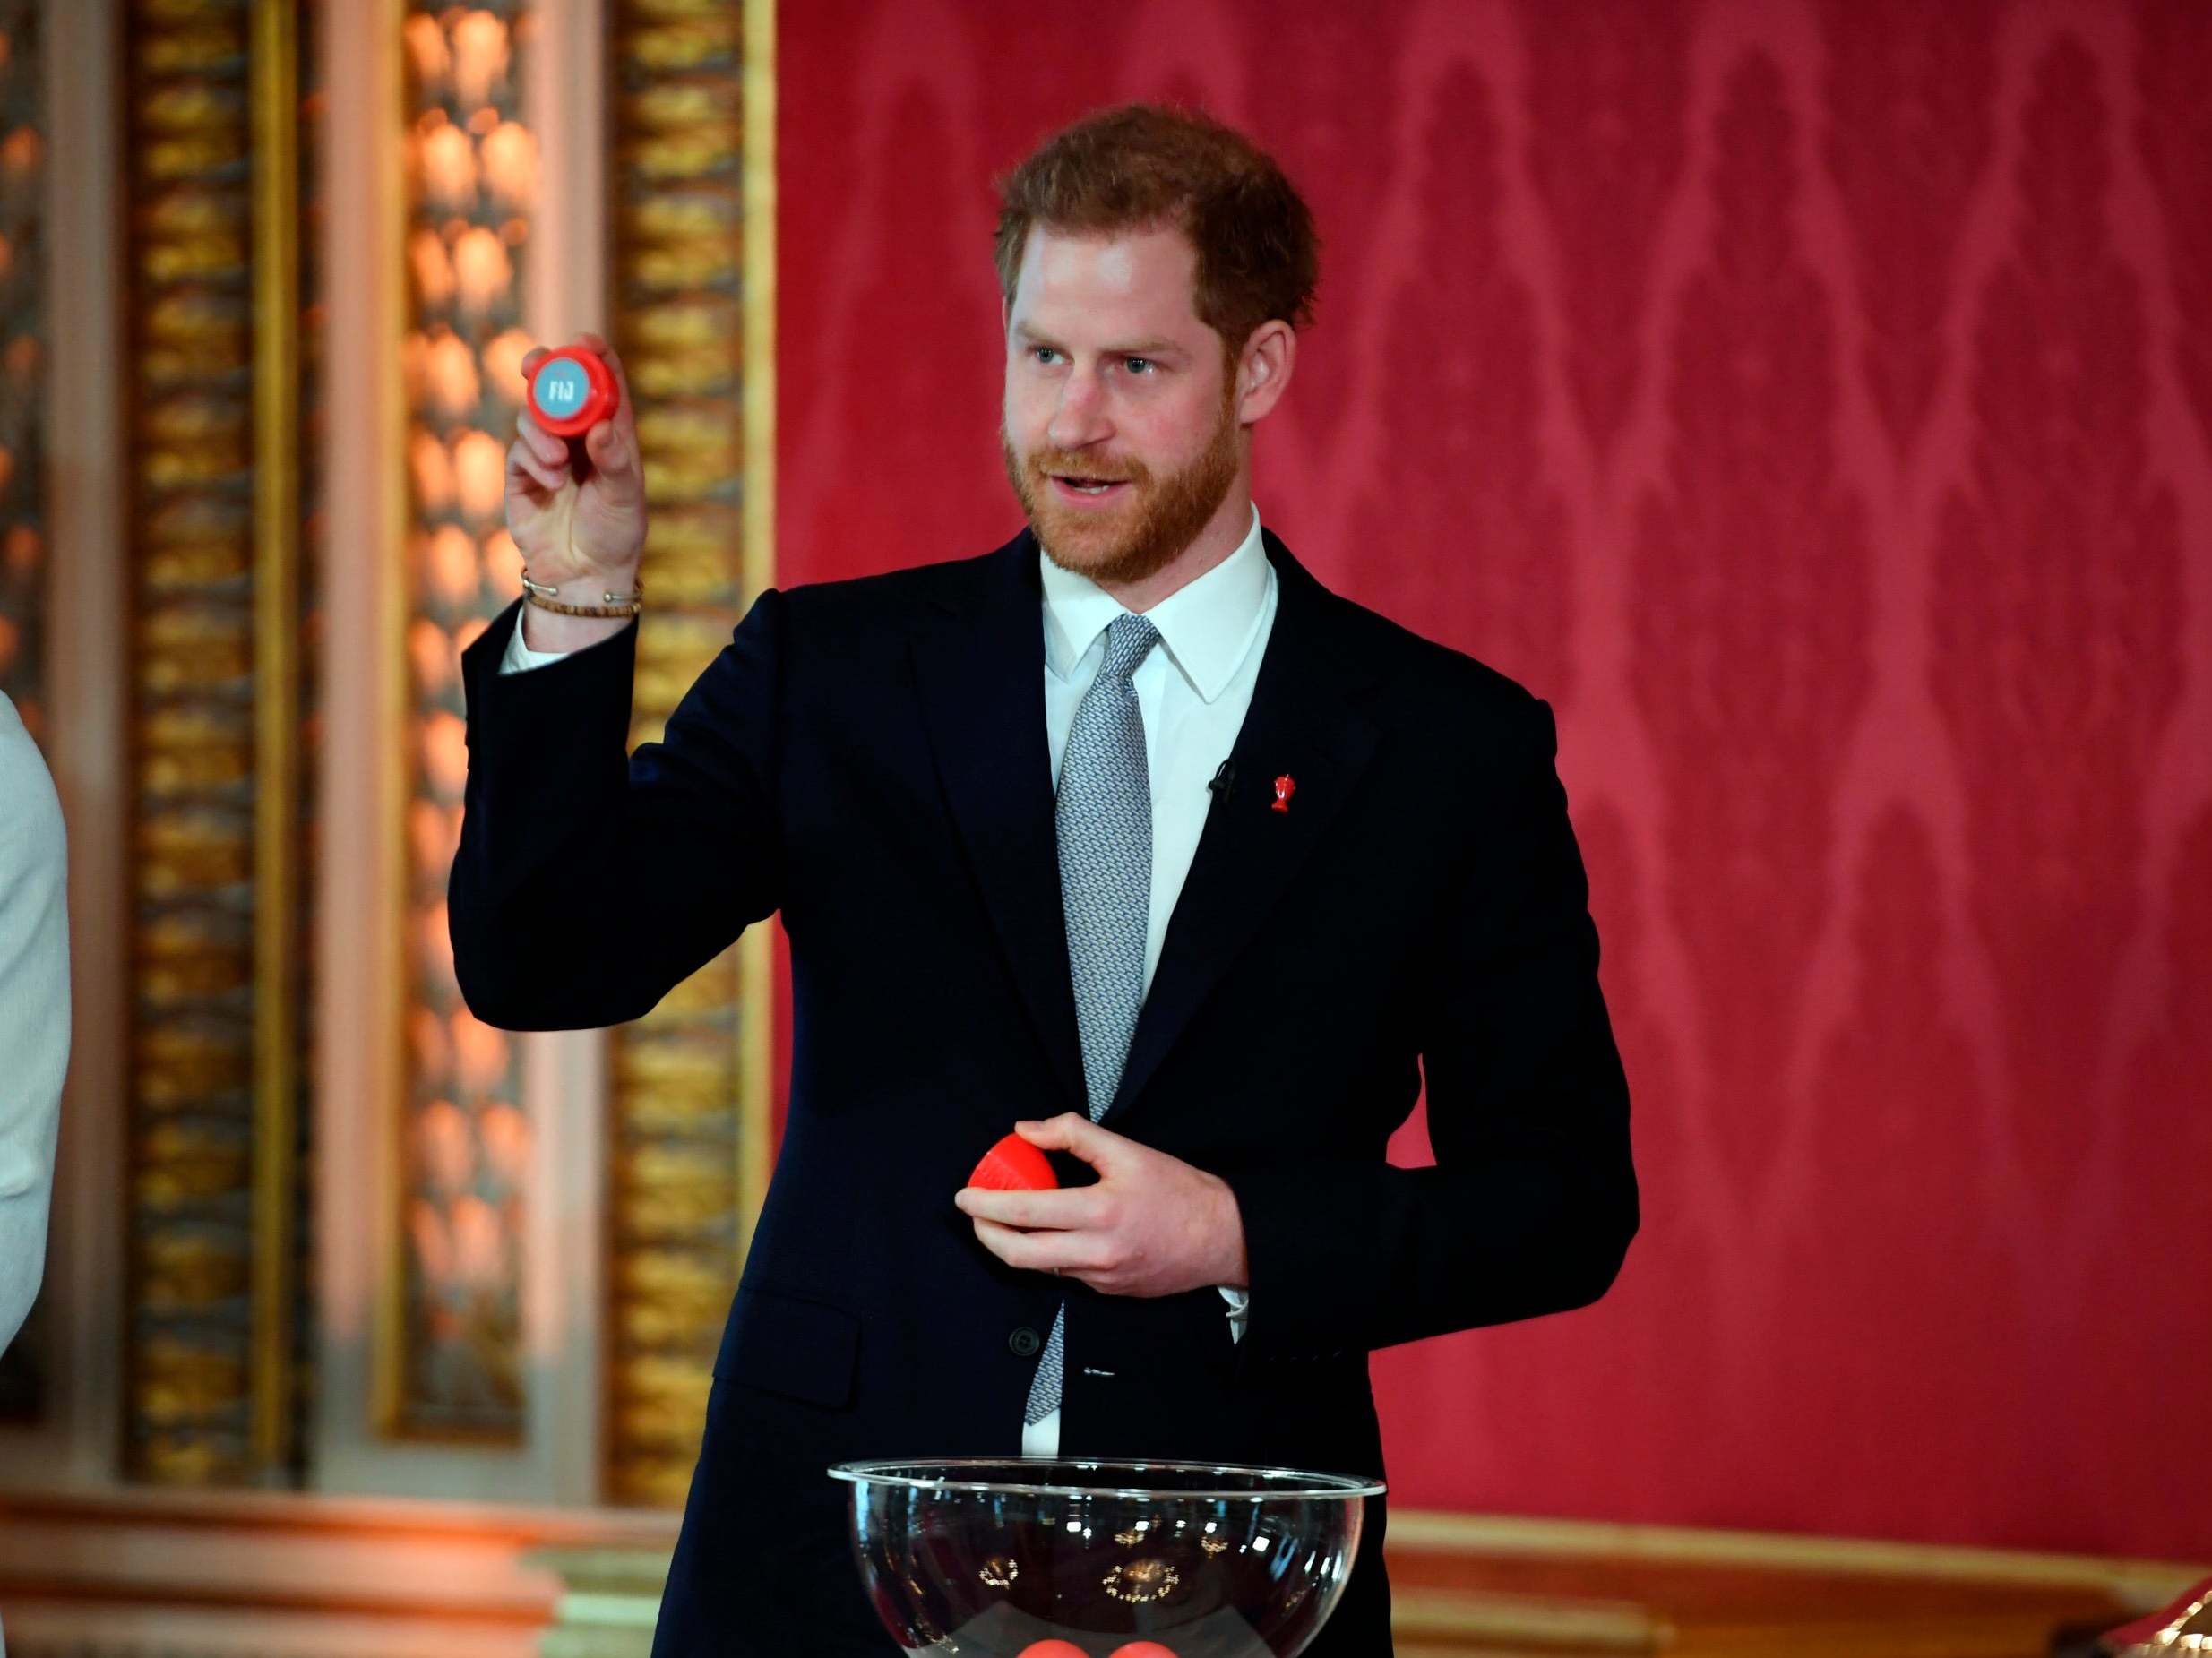 Prince Harry hosted the draw at Buckingham Palace